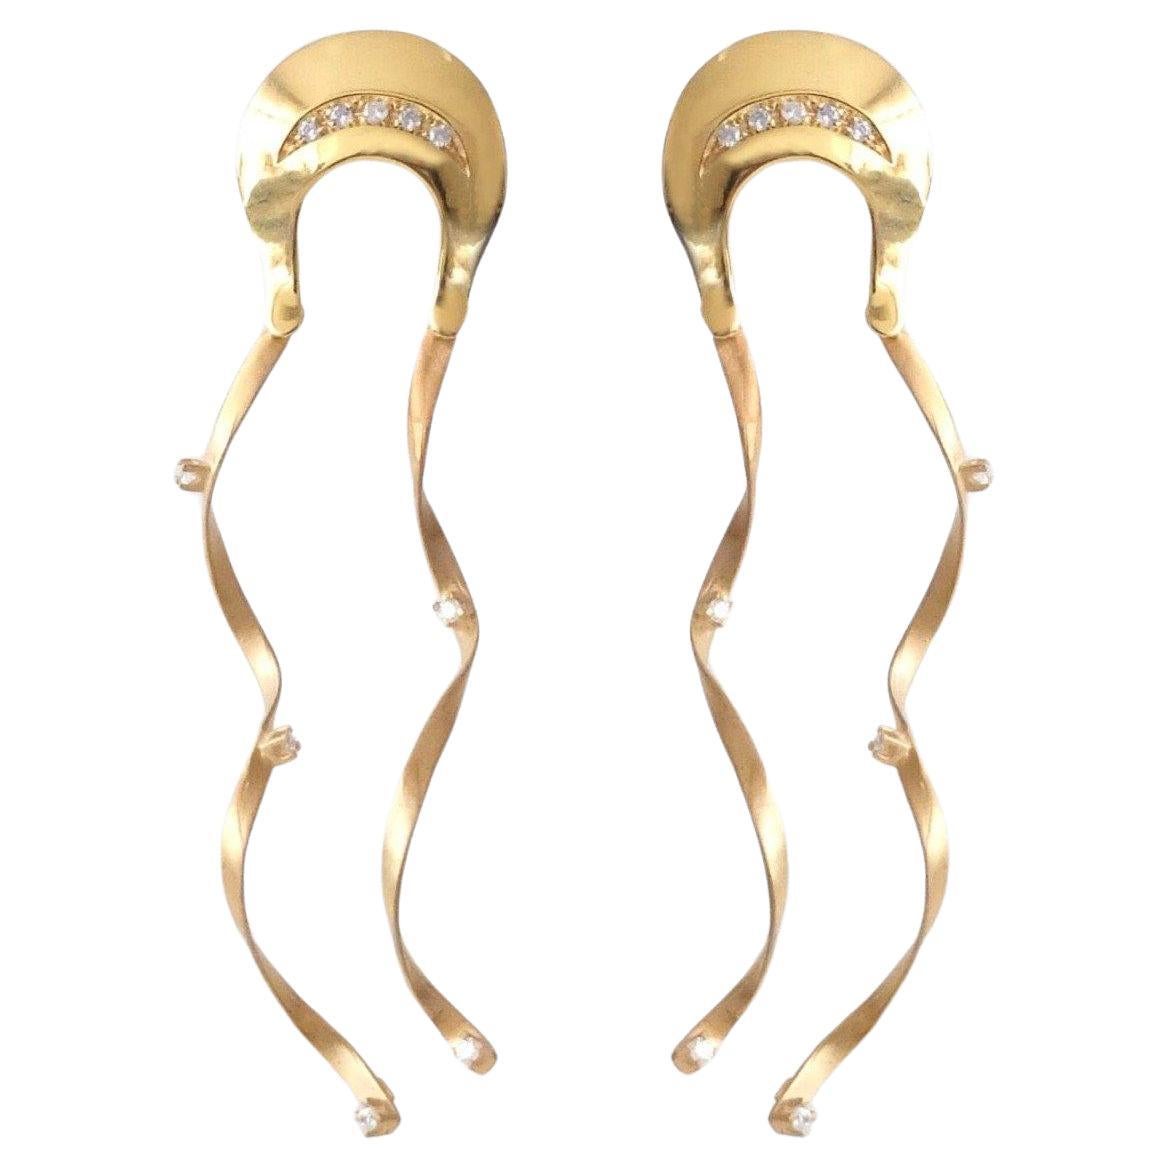 Earrings 925 CZ silver, 18 kt. gold plated, made in Italy, Méduse For Sale